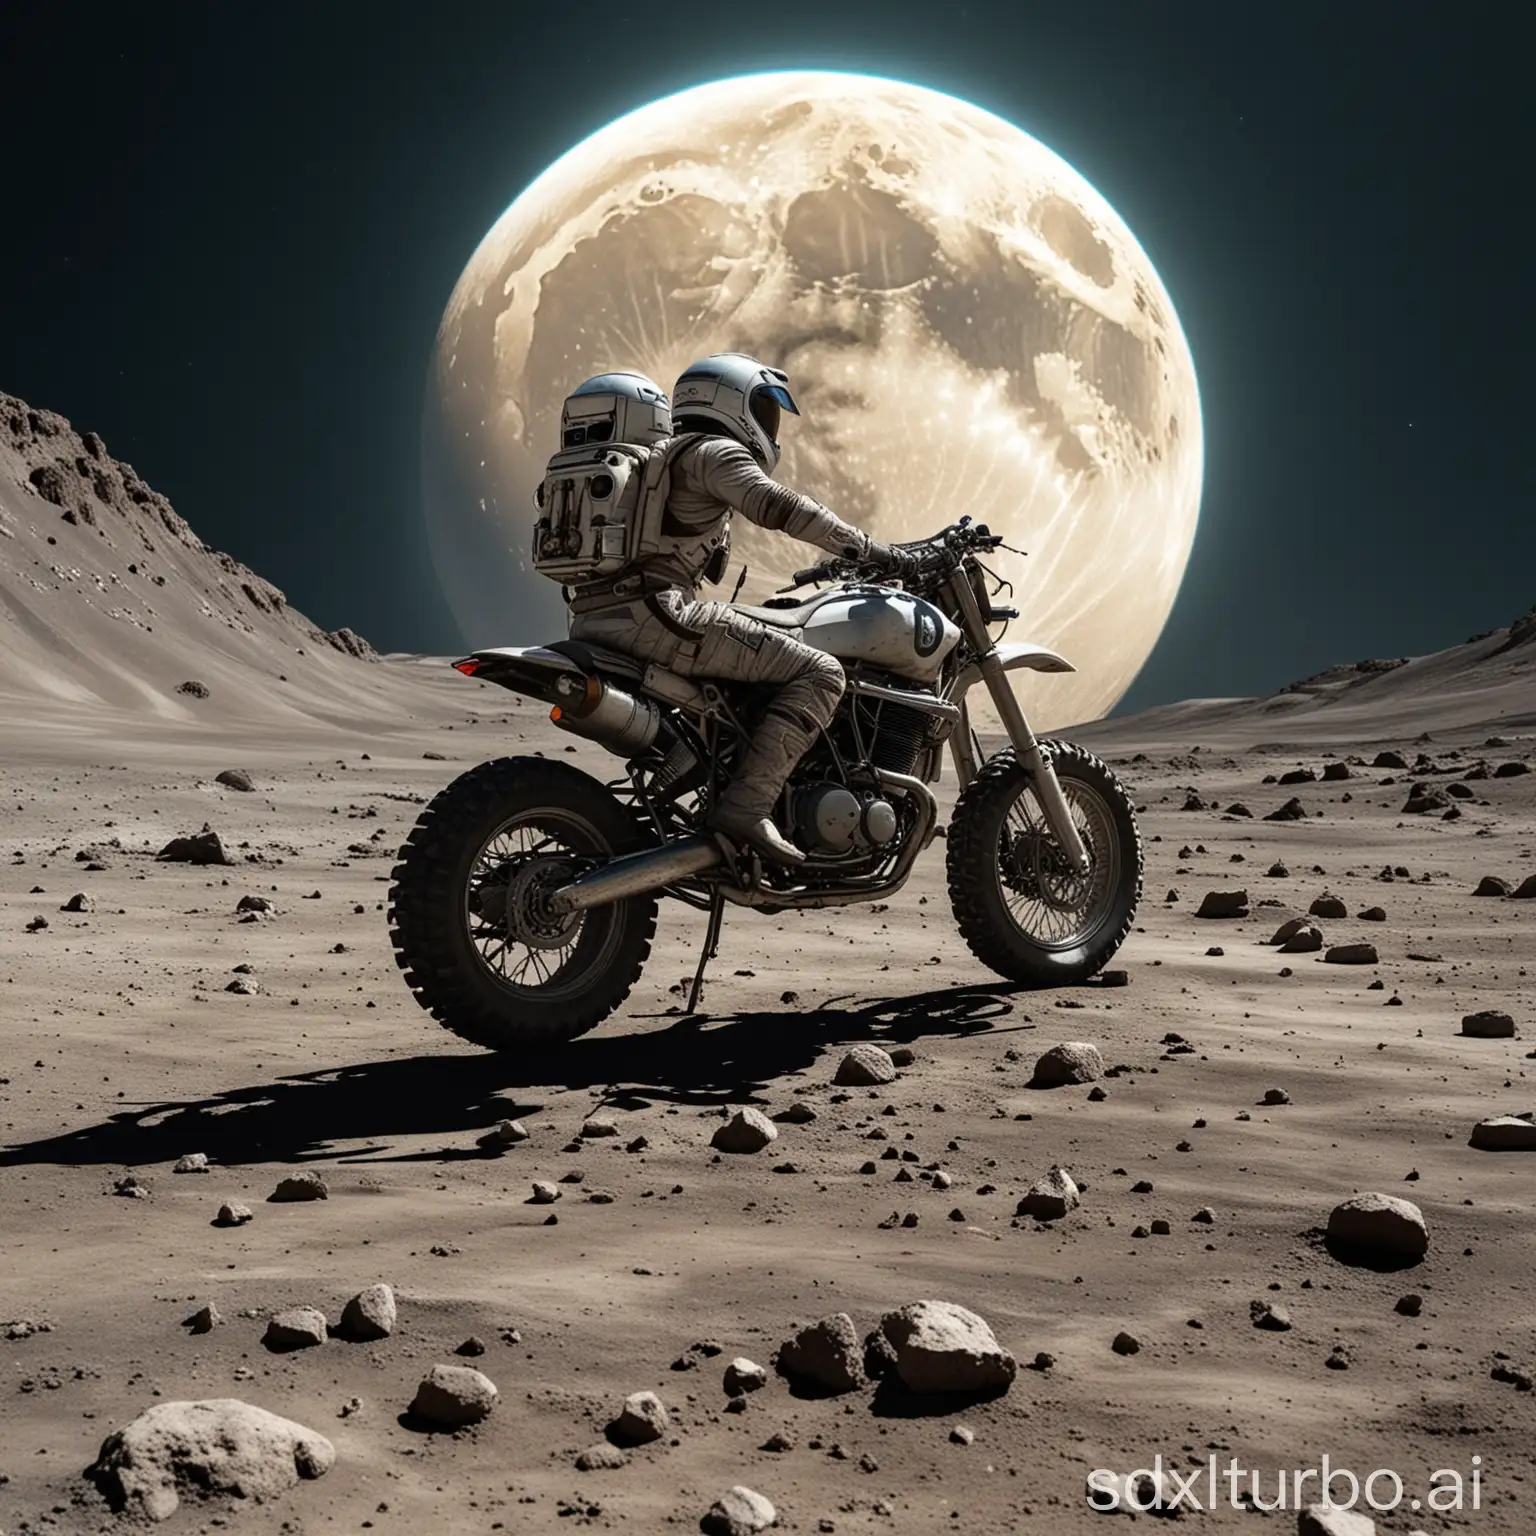 Futuristic-Motorcycle-Exploration-on-the-Moon